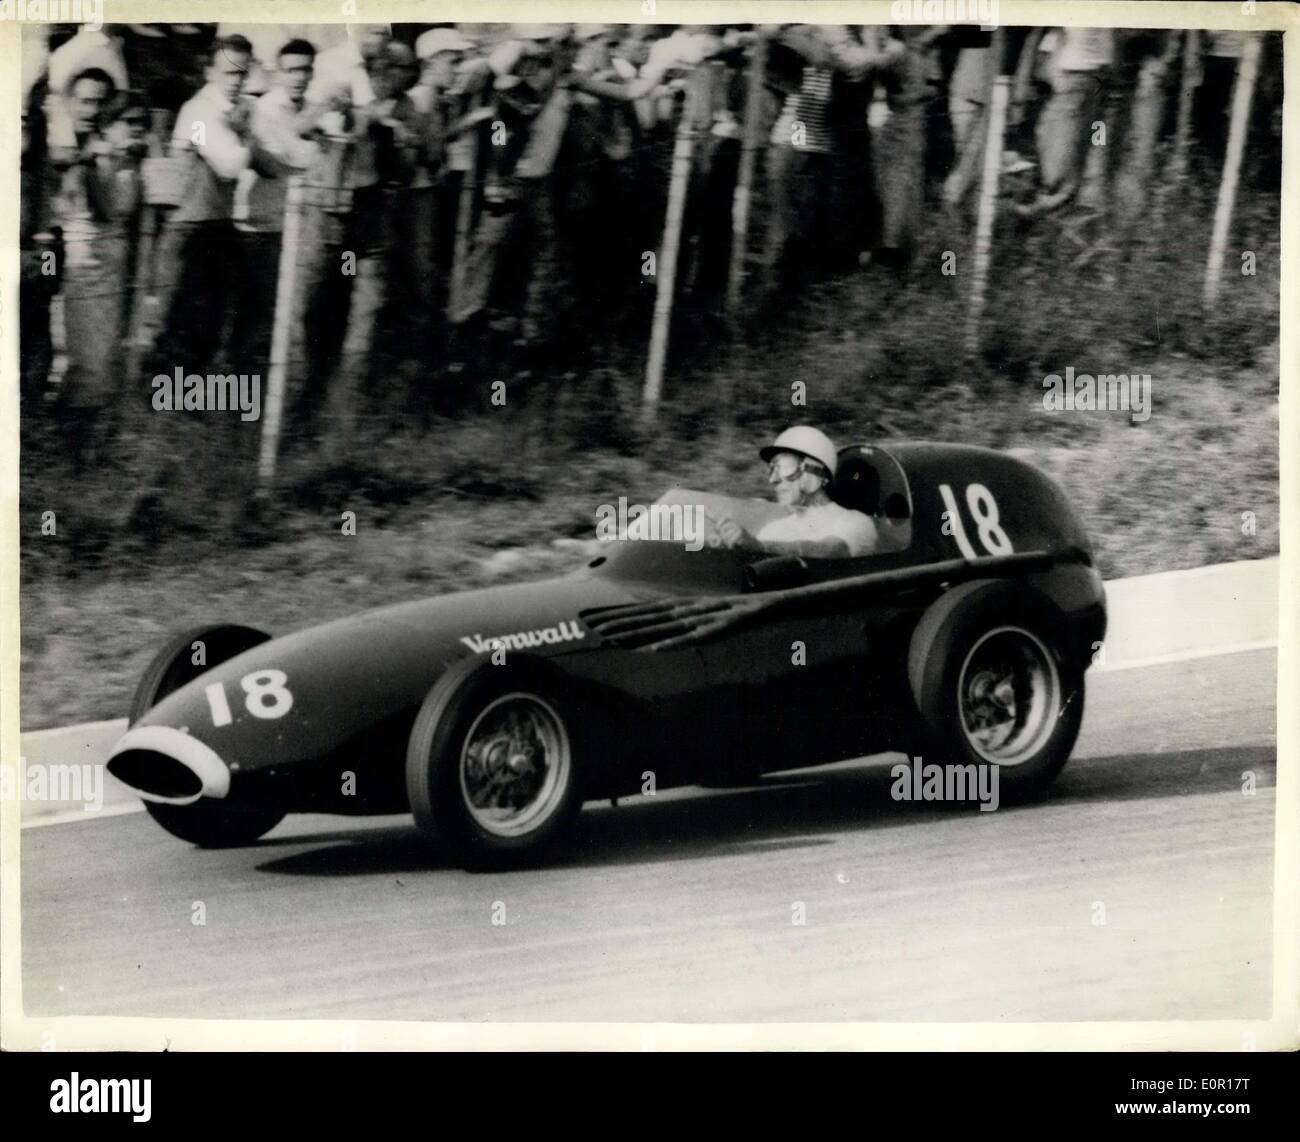 Sep. 10, 1957 - Stirling Moss Wins The Italian Grand Prix: Britain's Stirling Moss won the Italian Grand Prix at Monza in the all-British Vanwall with a record average speed of 120.3 m.p.h. World Champion Juan Fangio was beaten into second place. Photo shows Stirling Moss at speed in the all-British Vanwall when he won the great race at Monza. Stock Photo